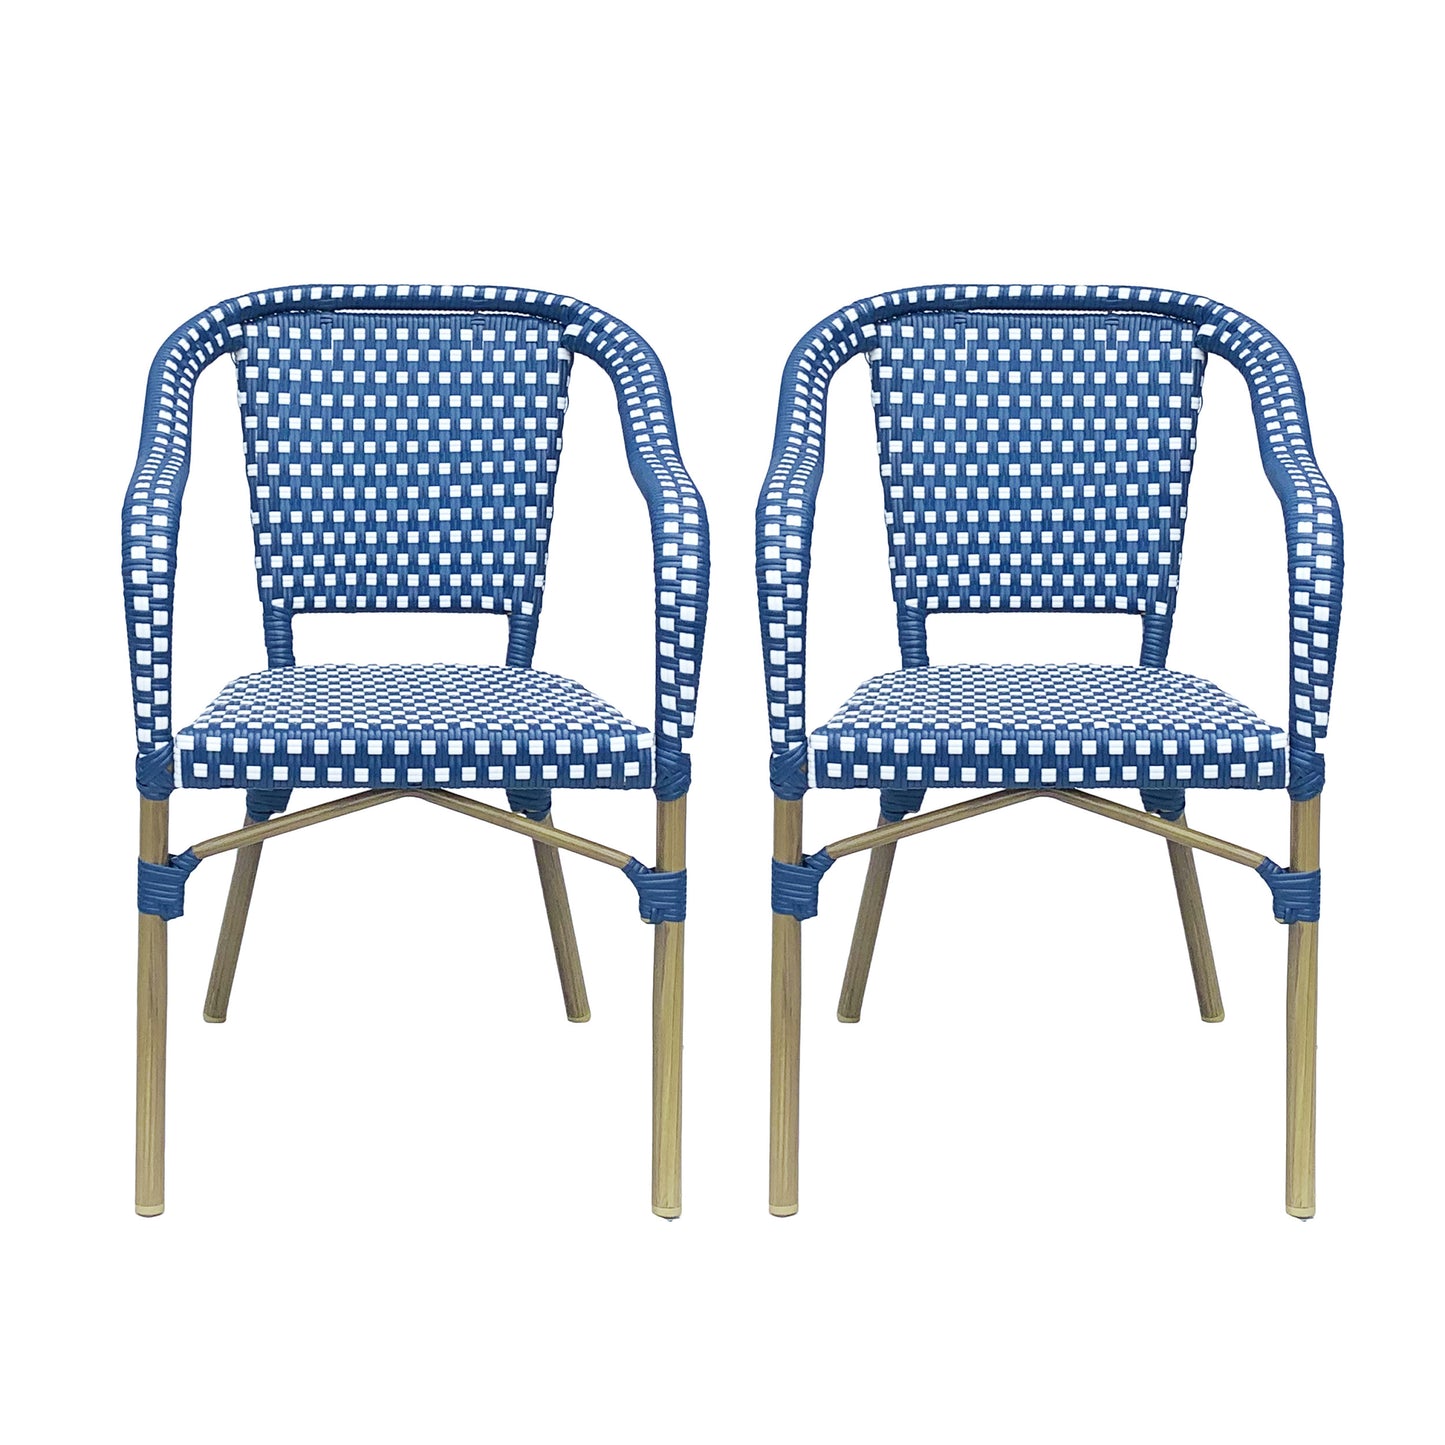 Grouse Outdoor French Bistro Chairs, Set of 2